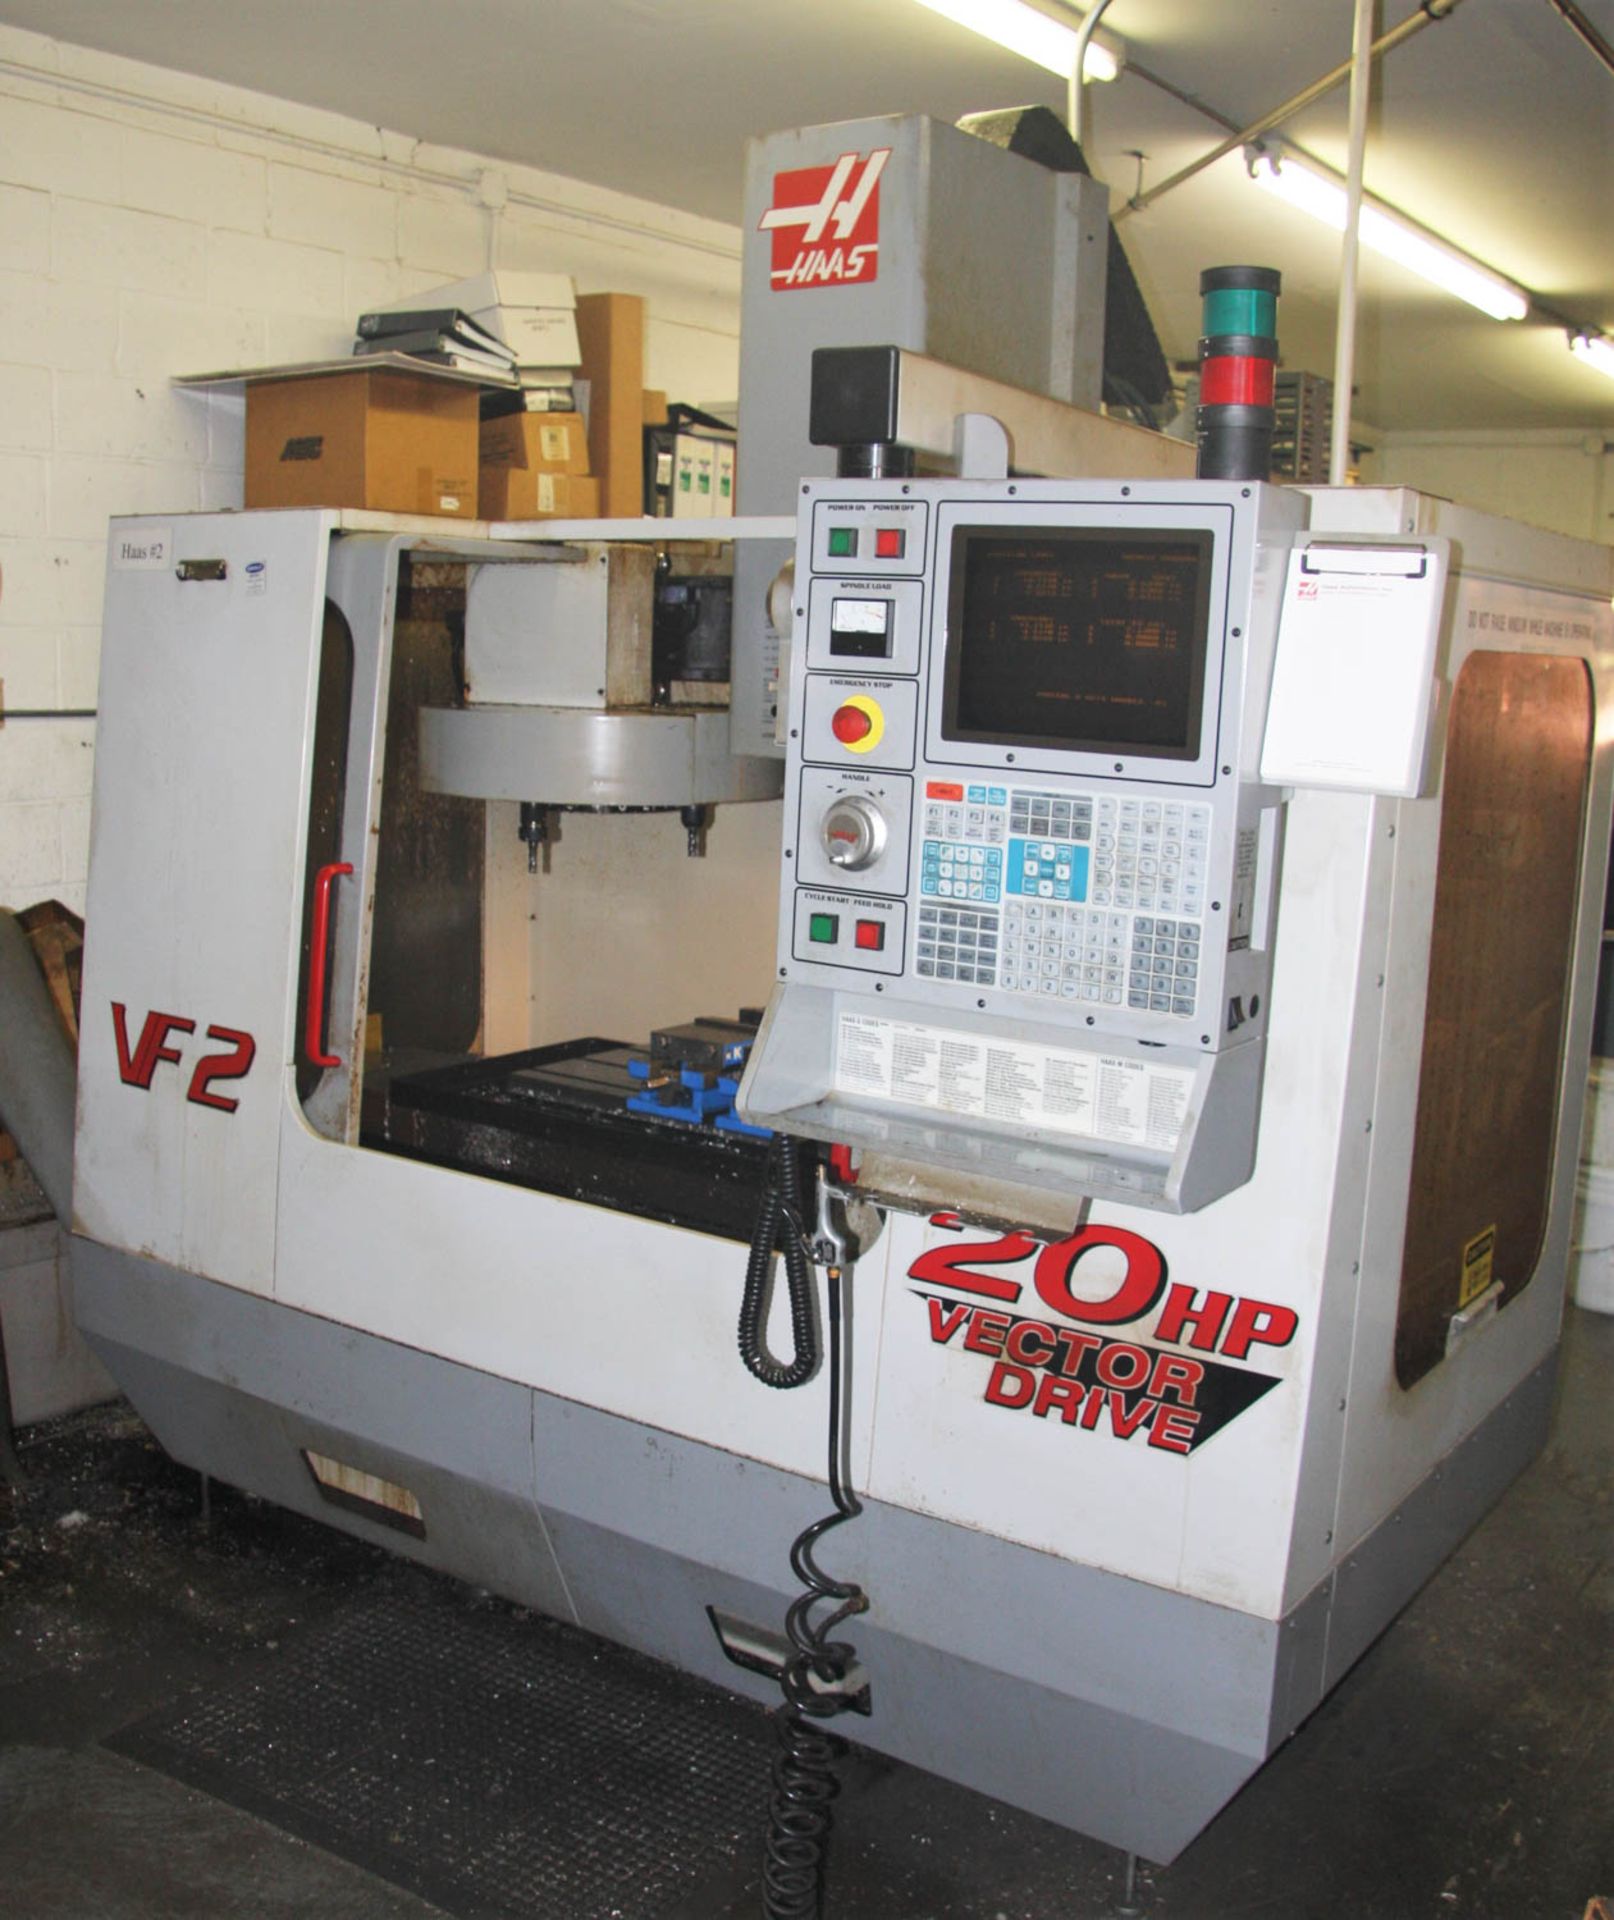 HAAS MDL. VF-2 CNC VERTICAL MACHINING CENTER, WITH 14" X 36" T-SLOTTED TABLE, 20-POSITION